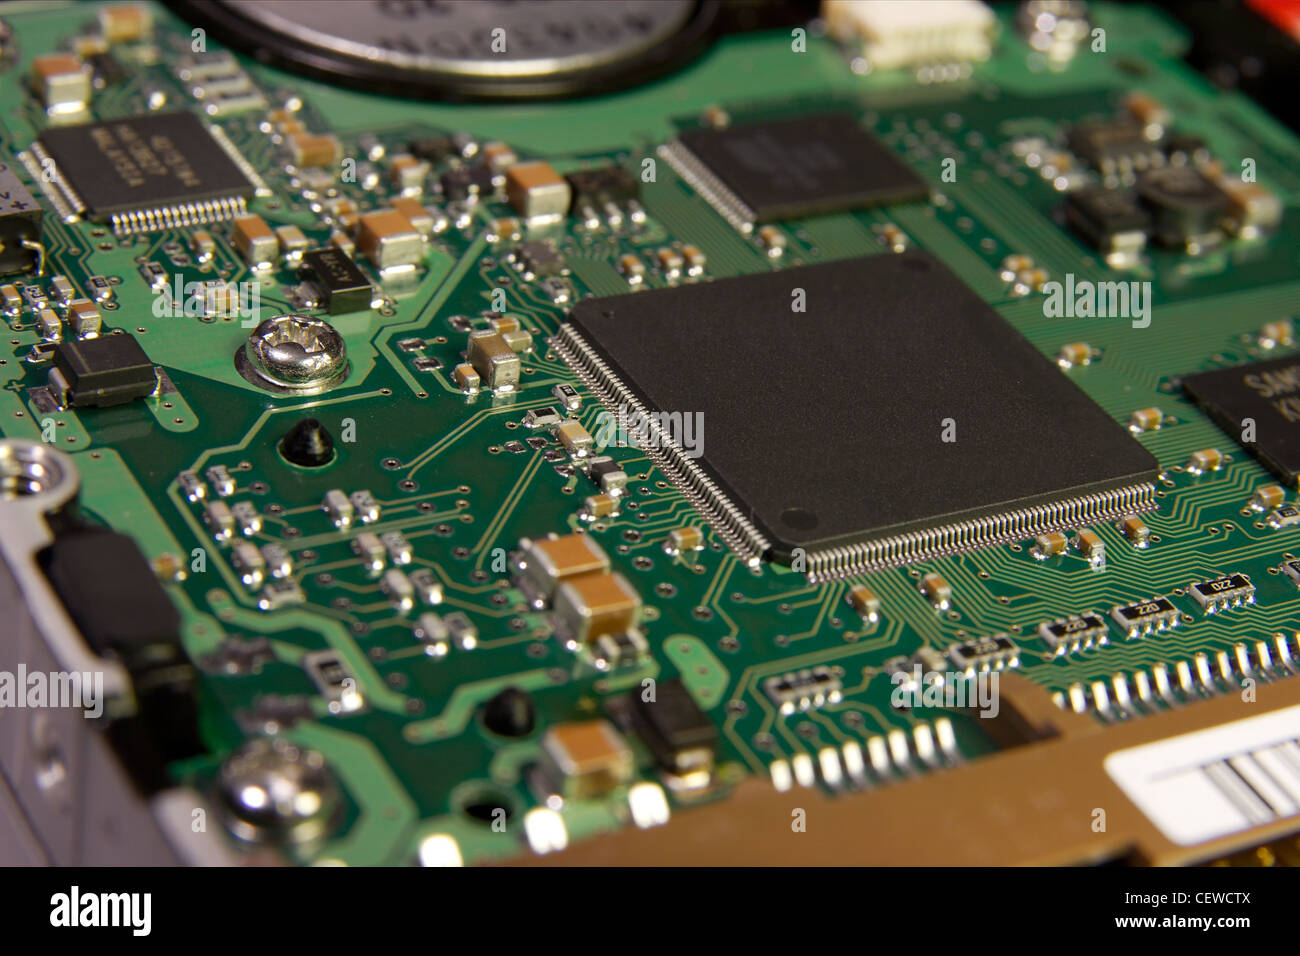 Printed Circuit Board with many electrical components Stock Photo